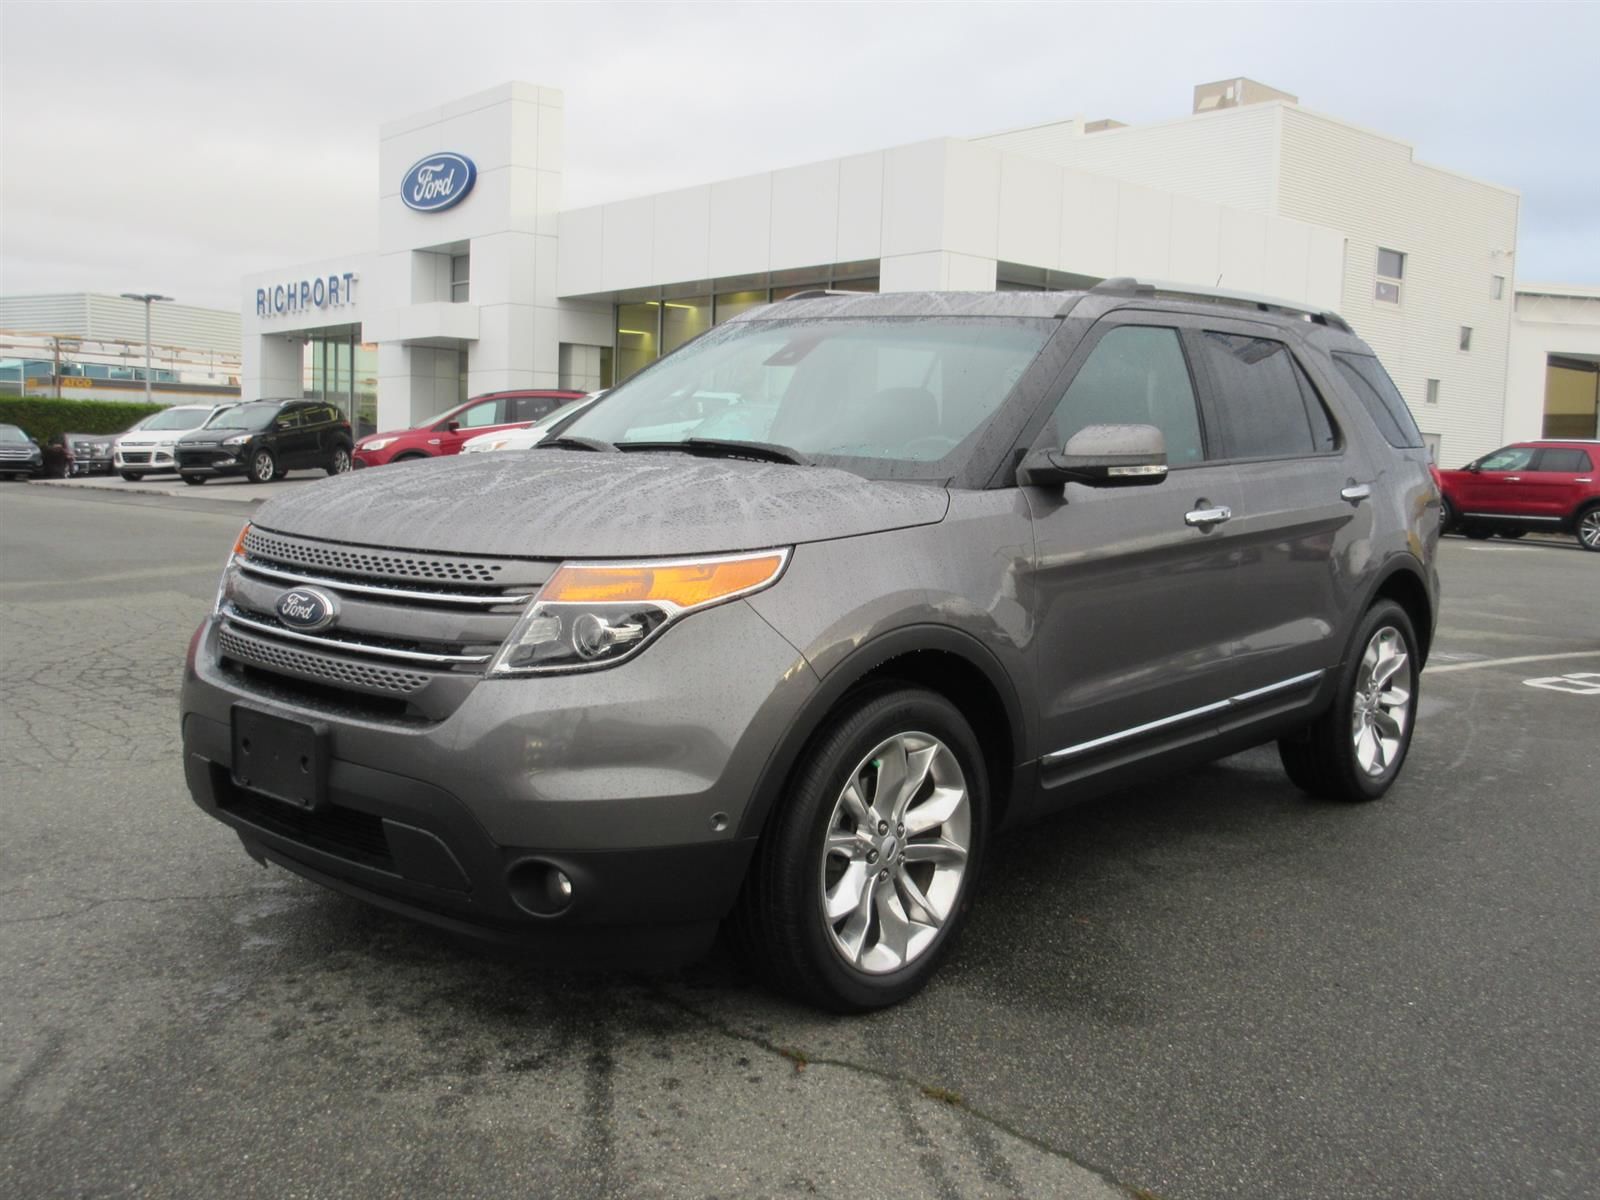 Richport ford used vehicles #9